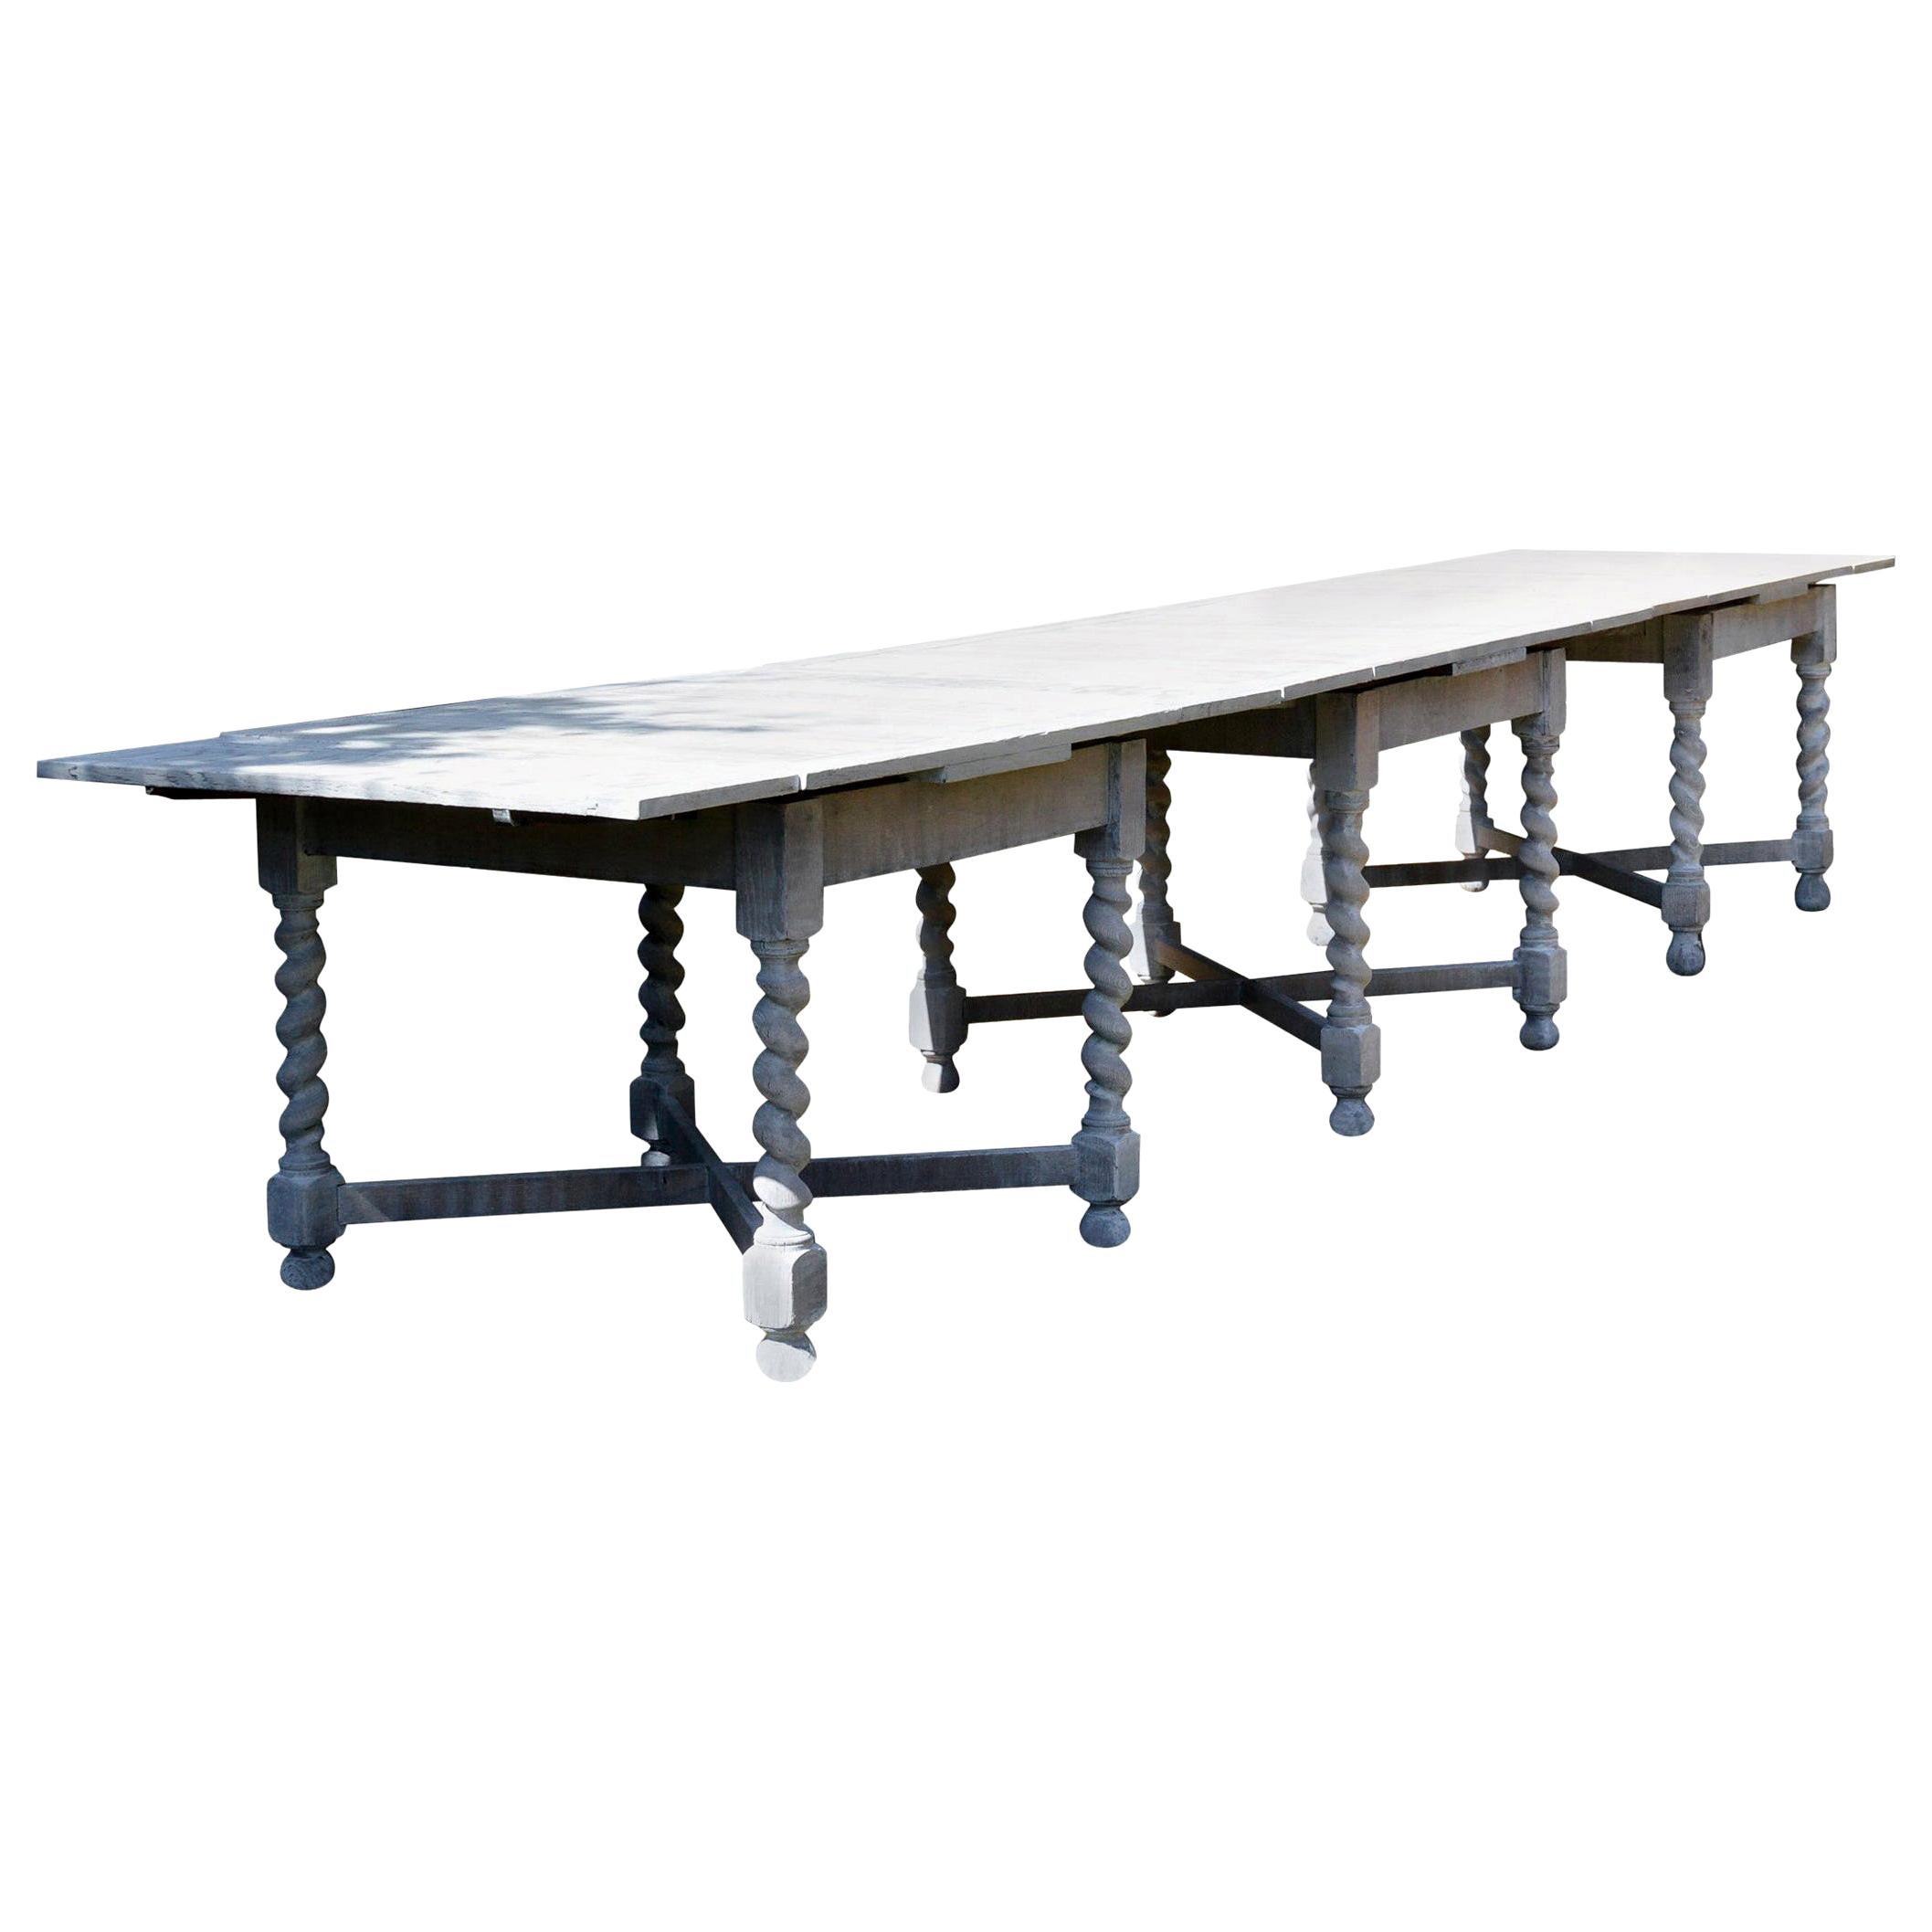 Large Antique Limed Oak Dining / Refectory Table in Carolean Style 12-Seat